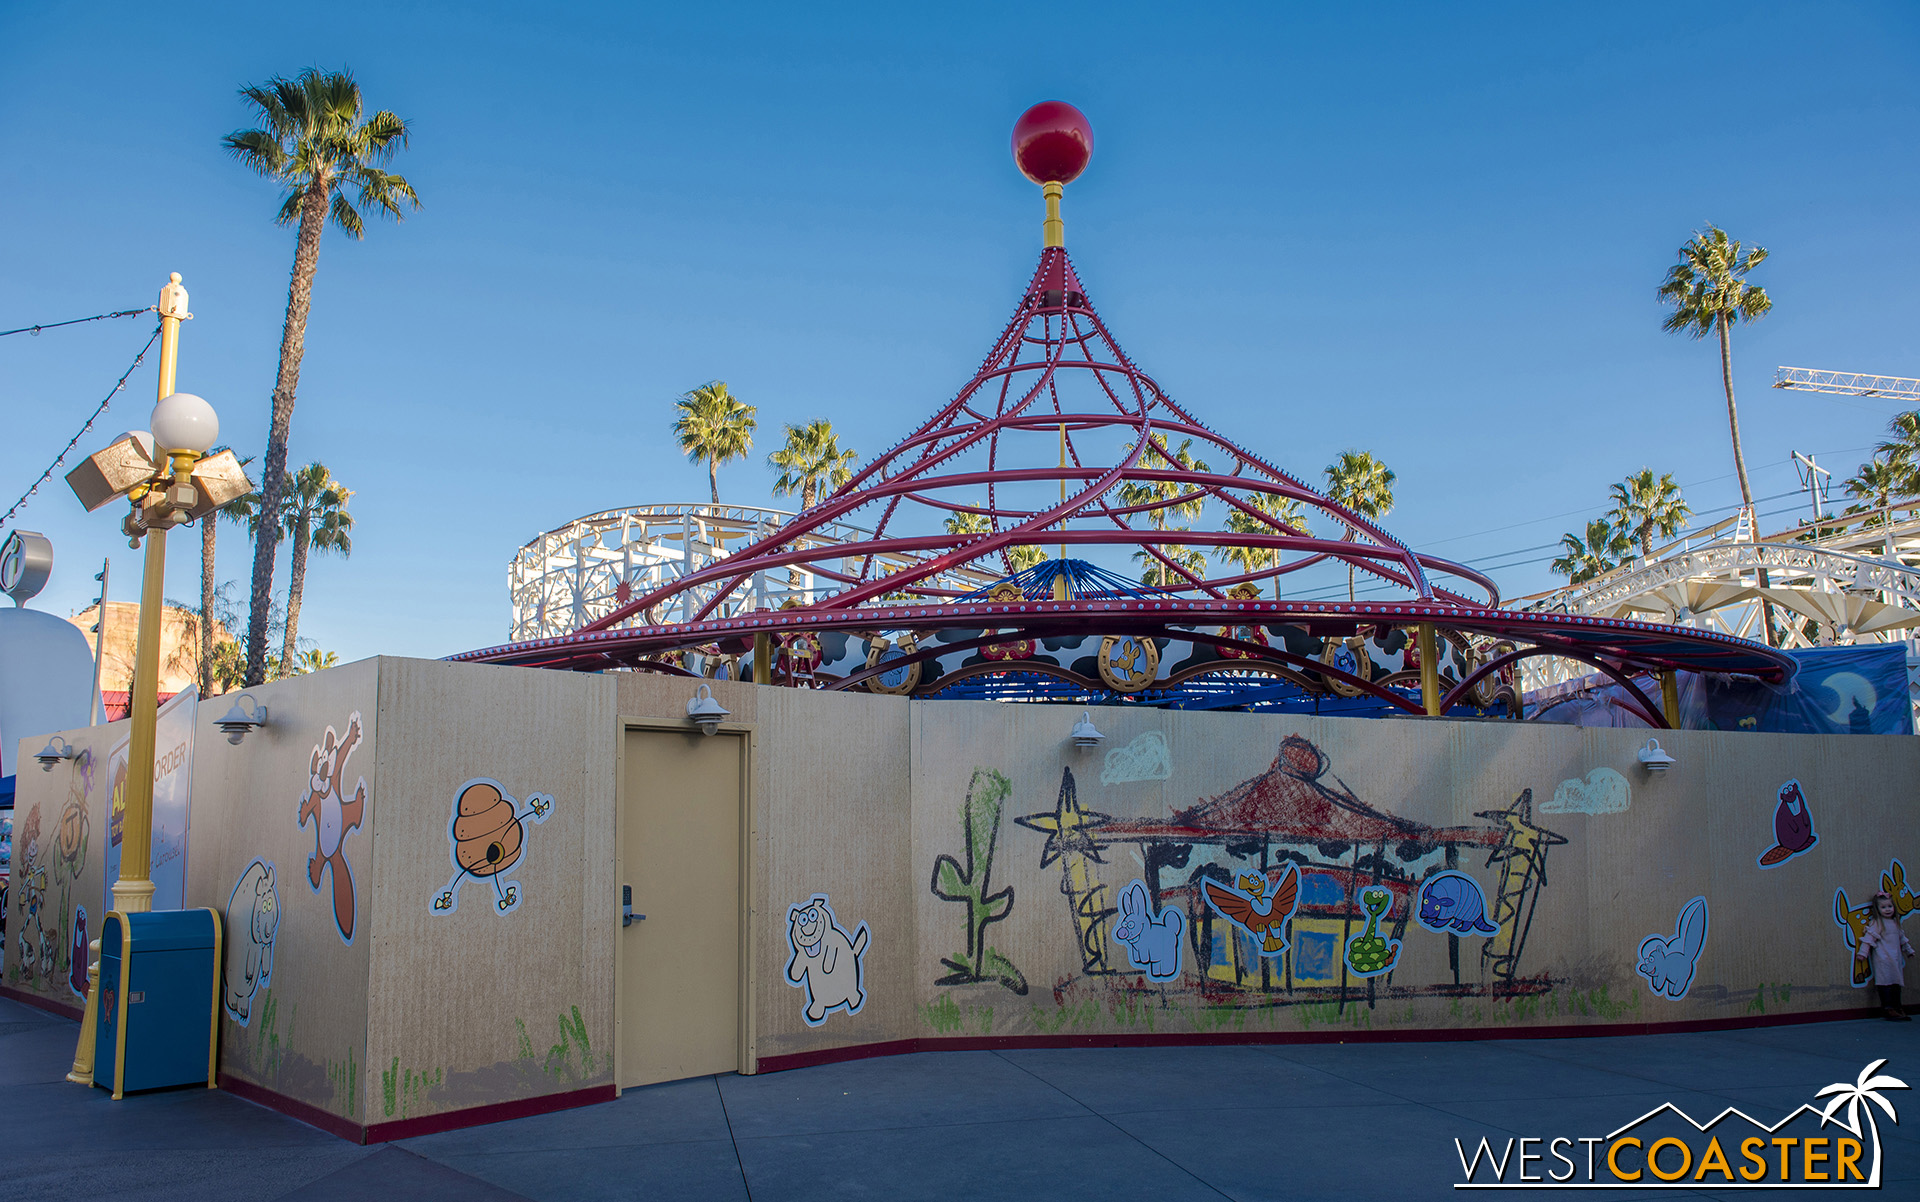  More progress is occurring at the merry-go-round. 